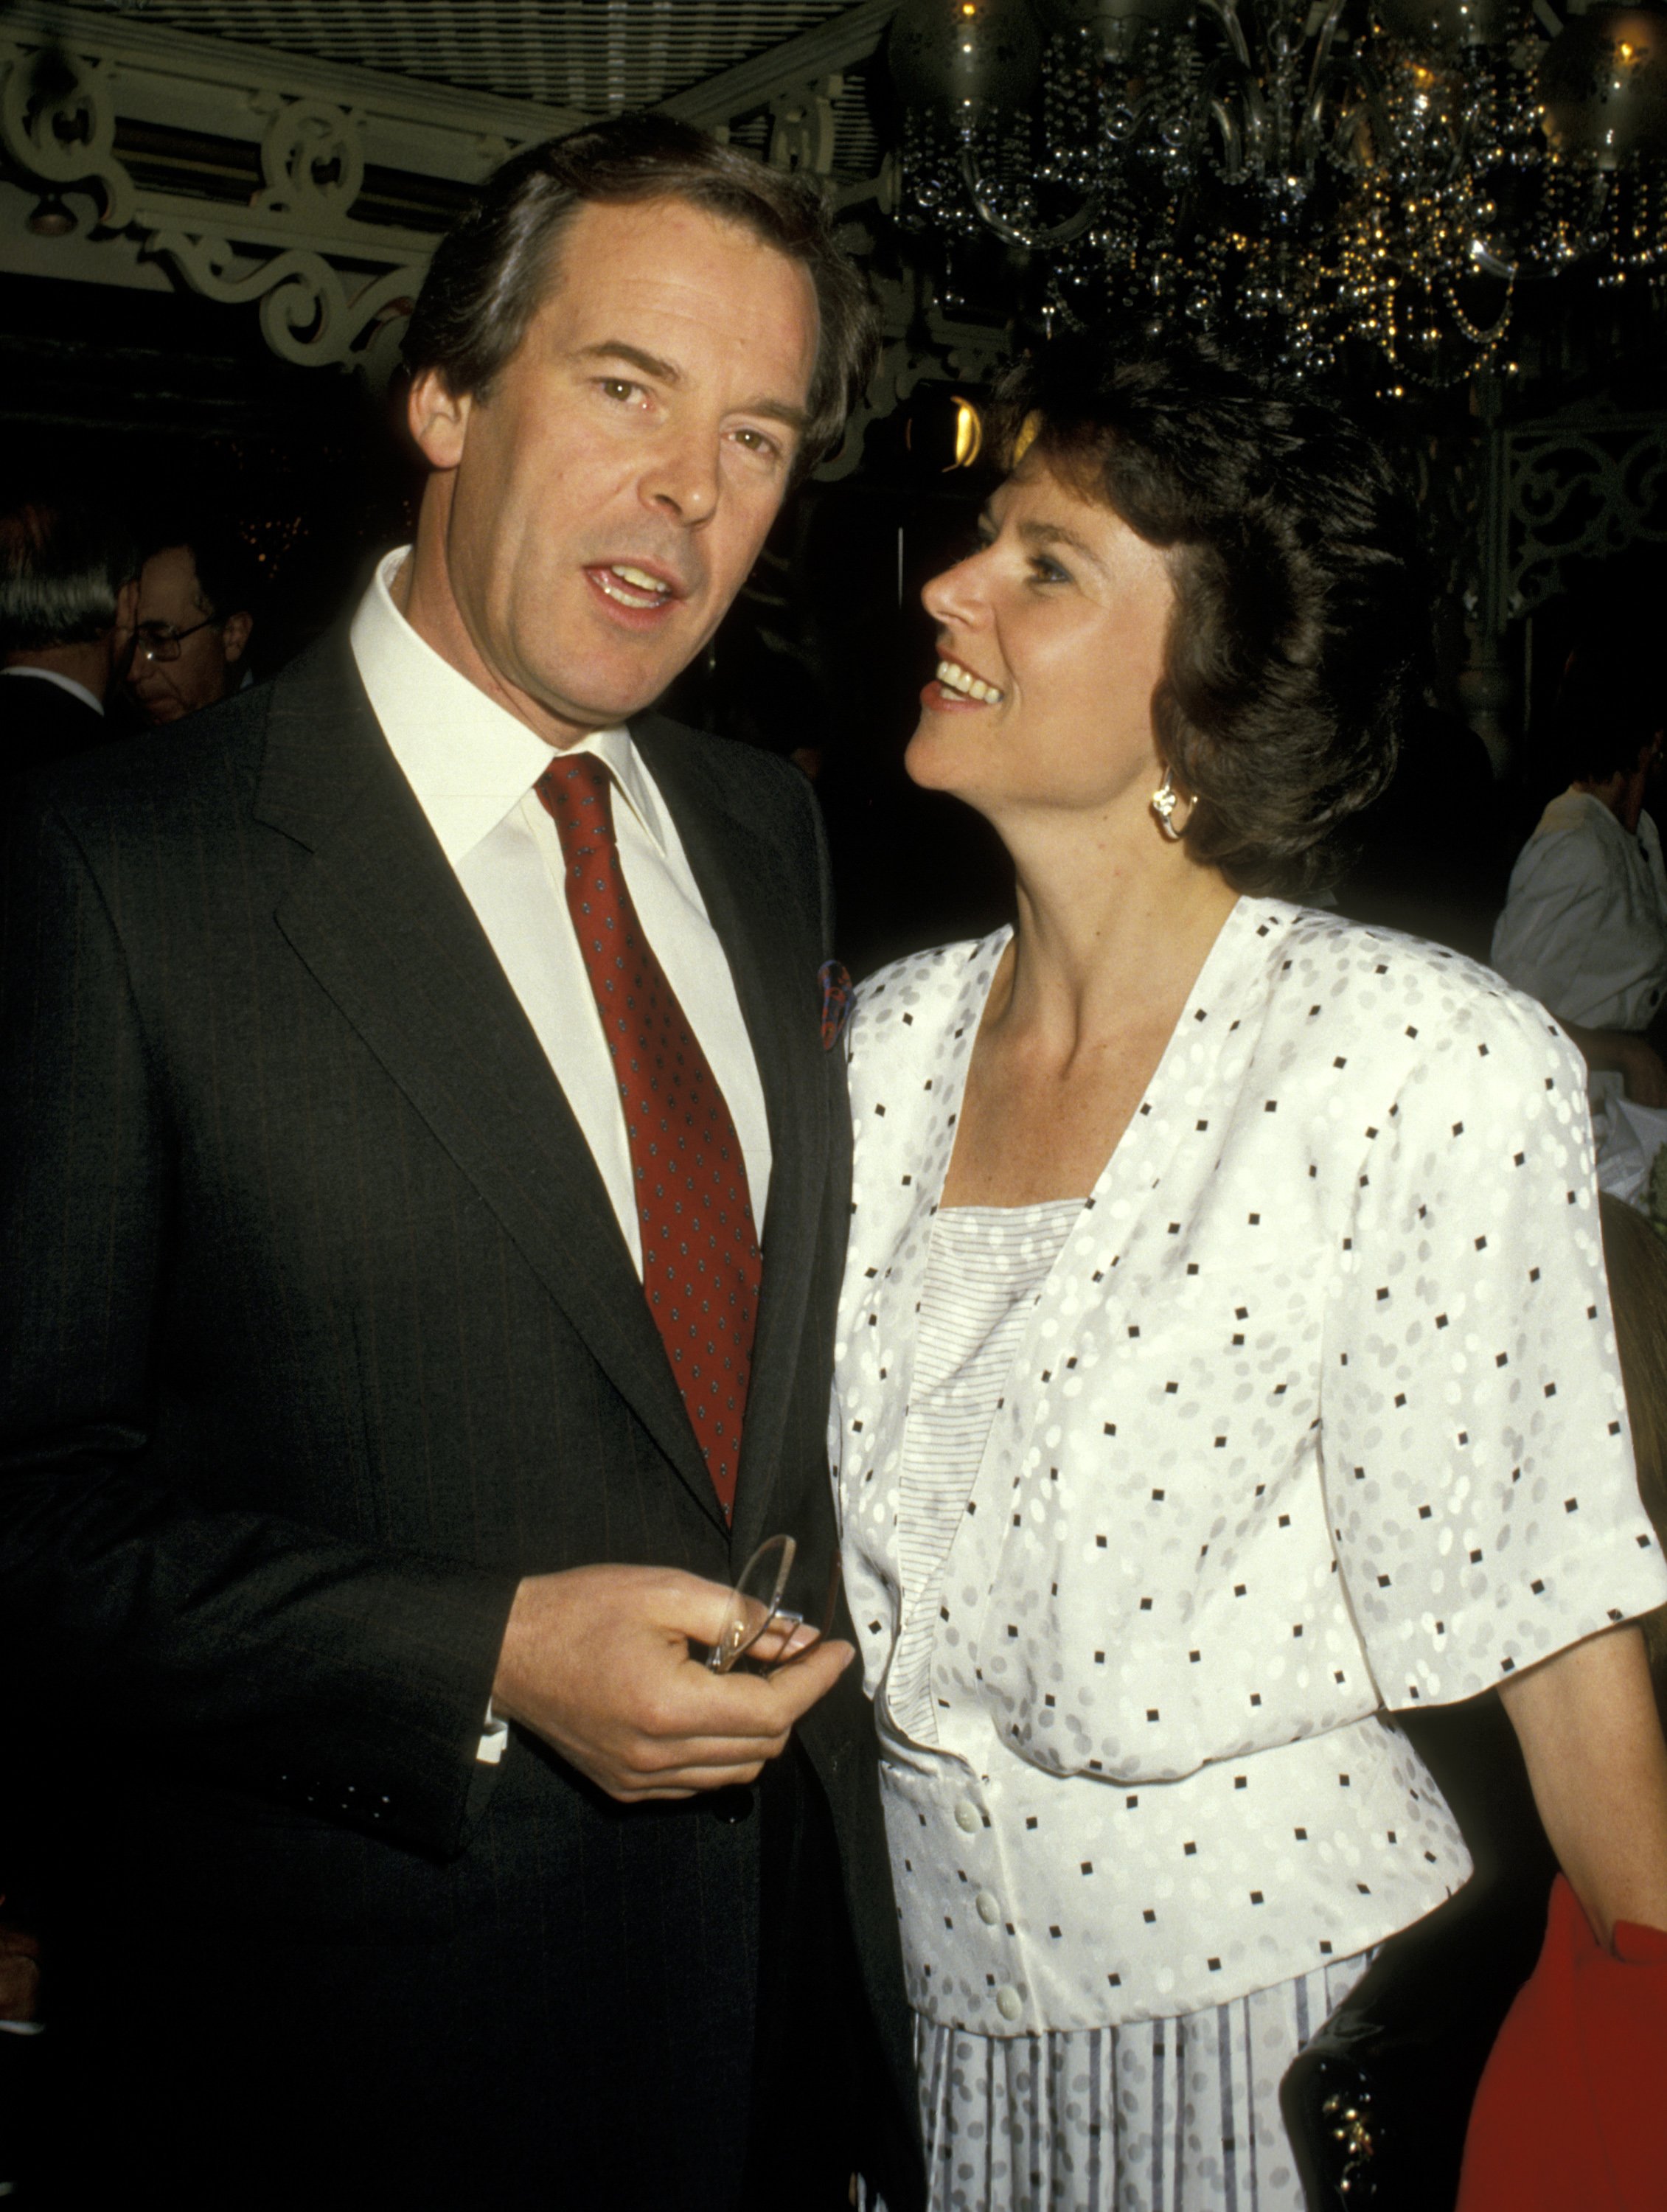 Peter Jennings and Kati Marton during "Who Owns News" Debate on May 6, 1987 at Tavern on the Green in New York City, New York | Source: Getty Images